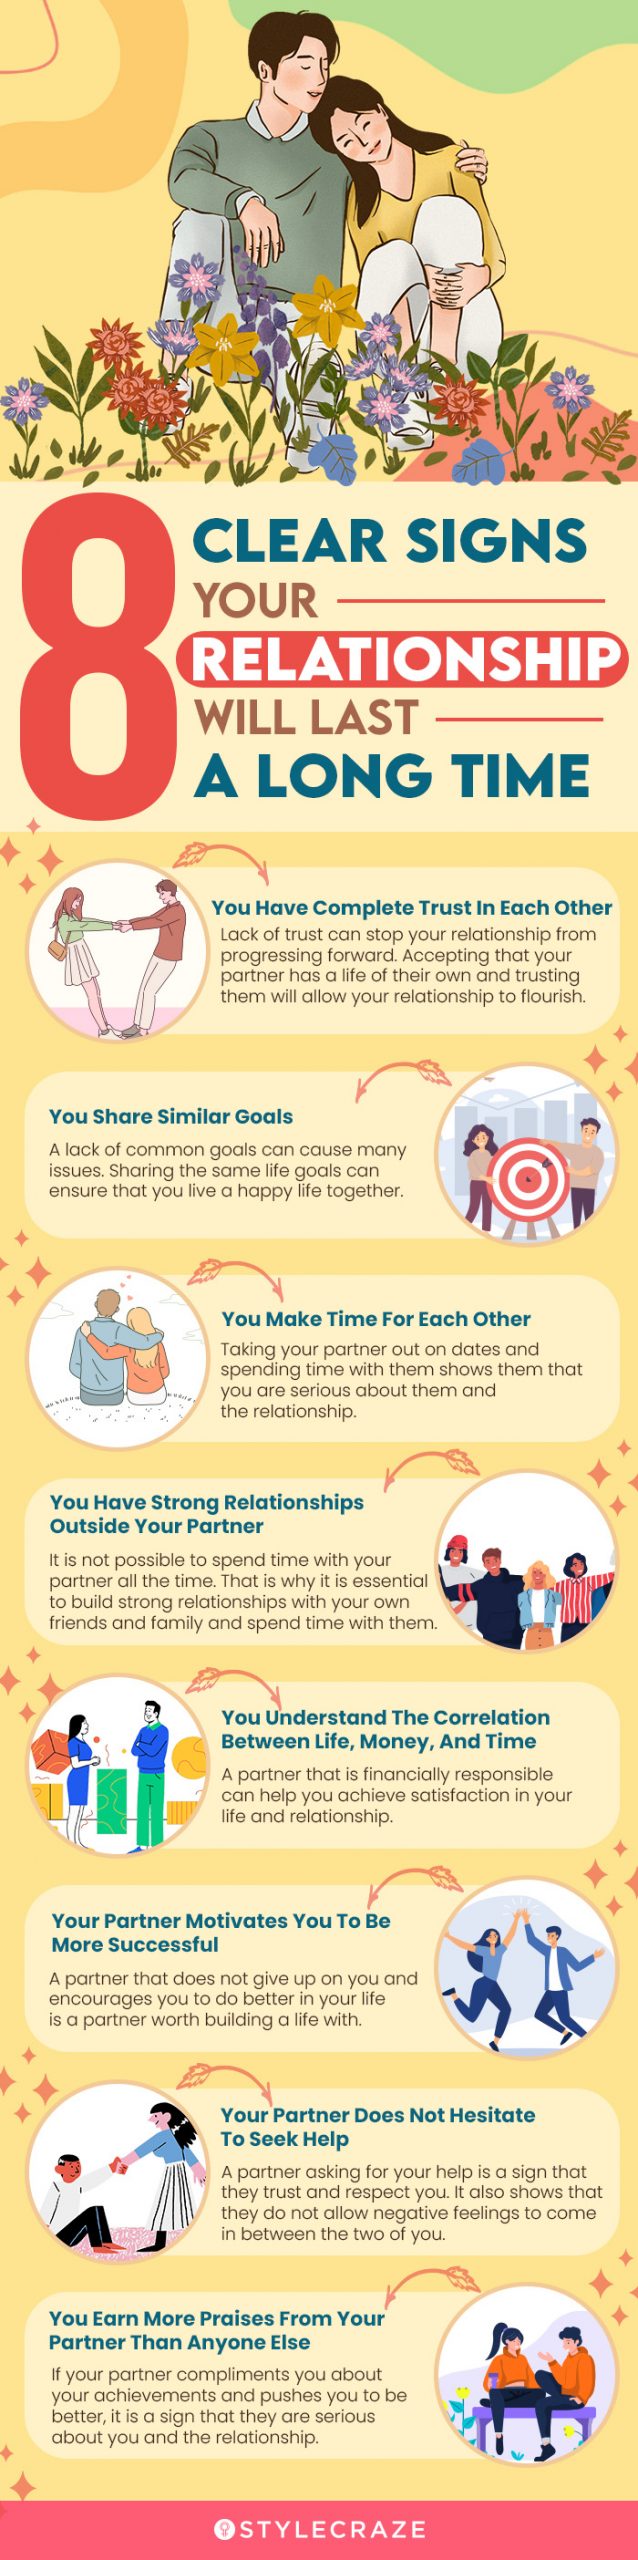 8 clear signs your relationship will last a long time [infographic]